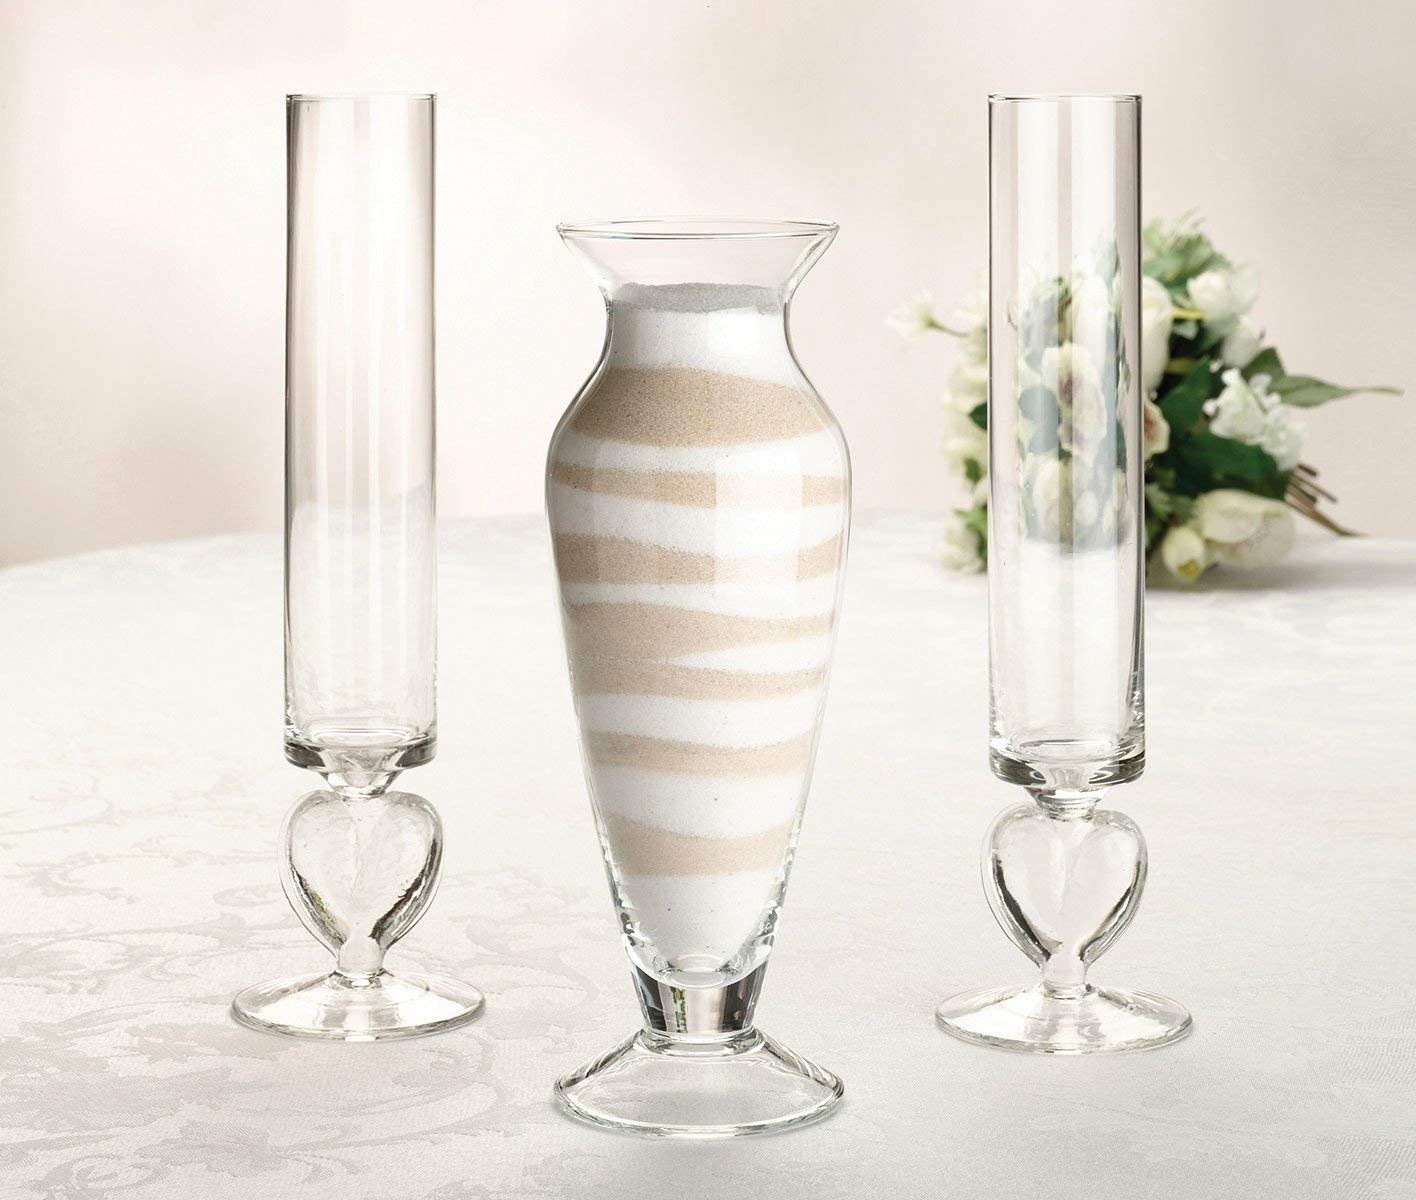 marquis by waterford sheridan flared 11 inch vase of amazon com lillian rose unity sand ceremony wedding vase set home for amazon com lillian rose unity sand ceremony wedding vase set home kitchen